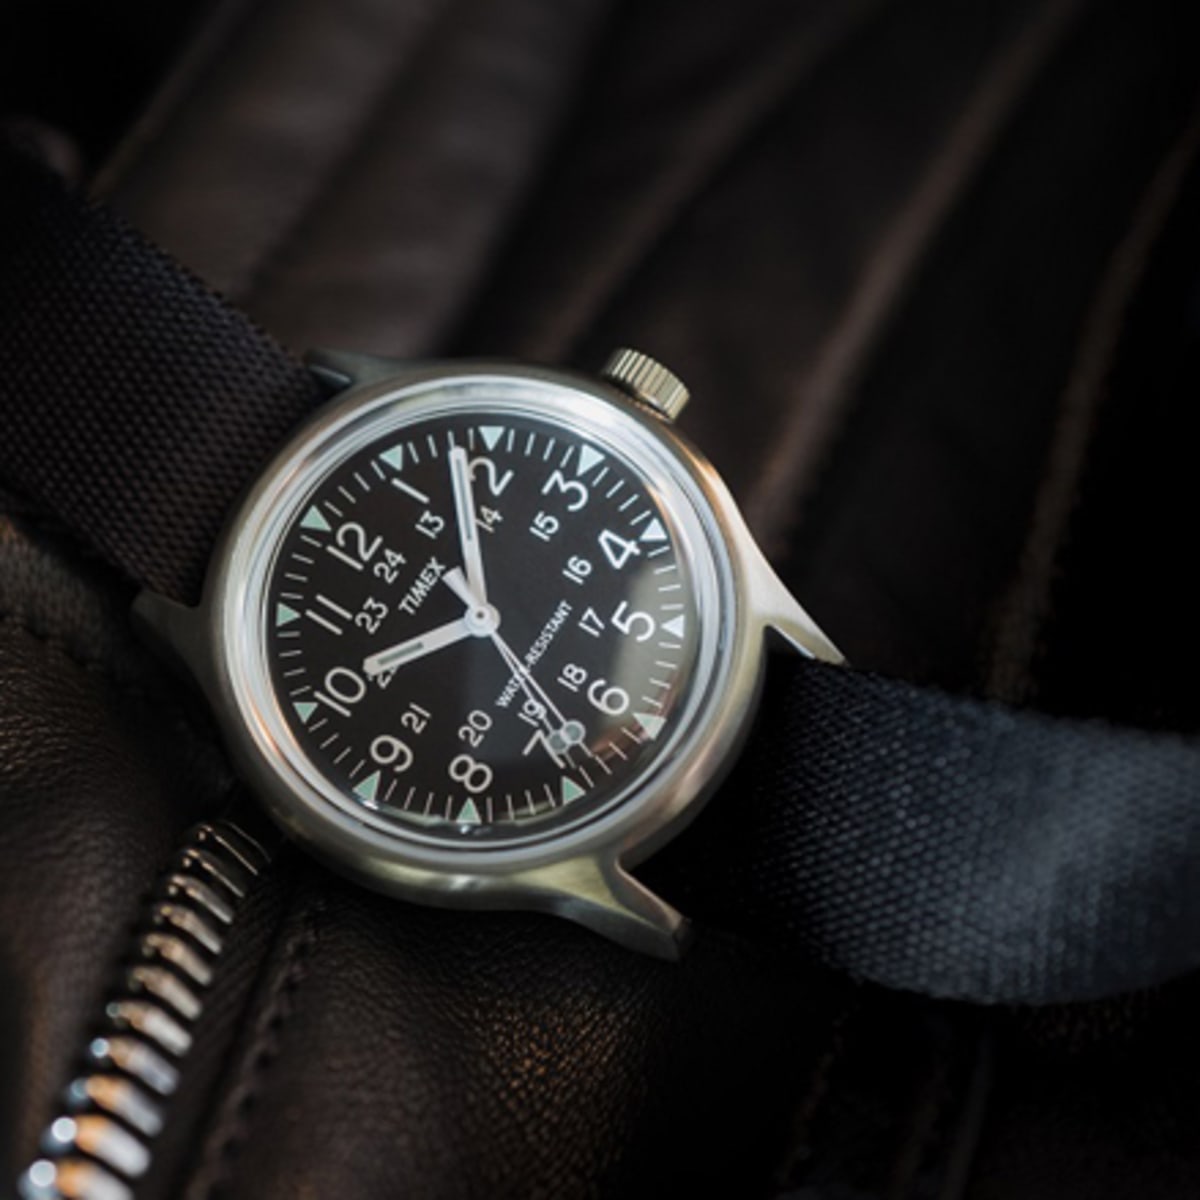 Timex Japan updates the original Camper design in stainless steel - Acquire